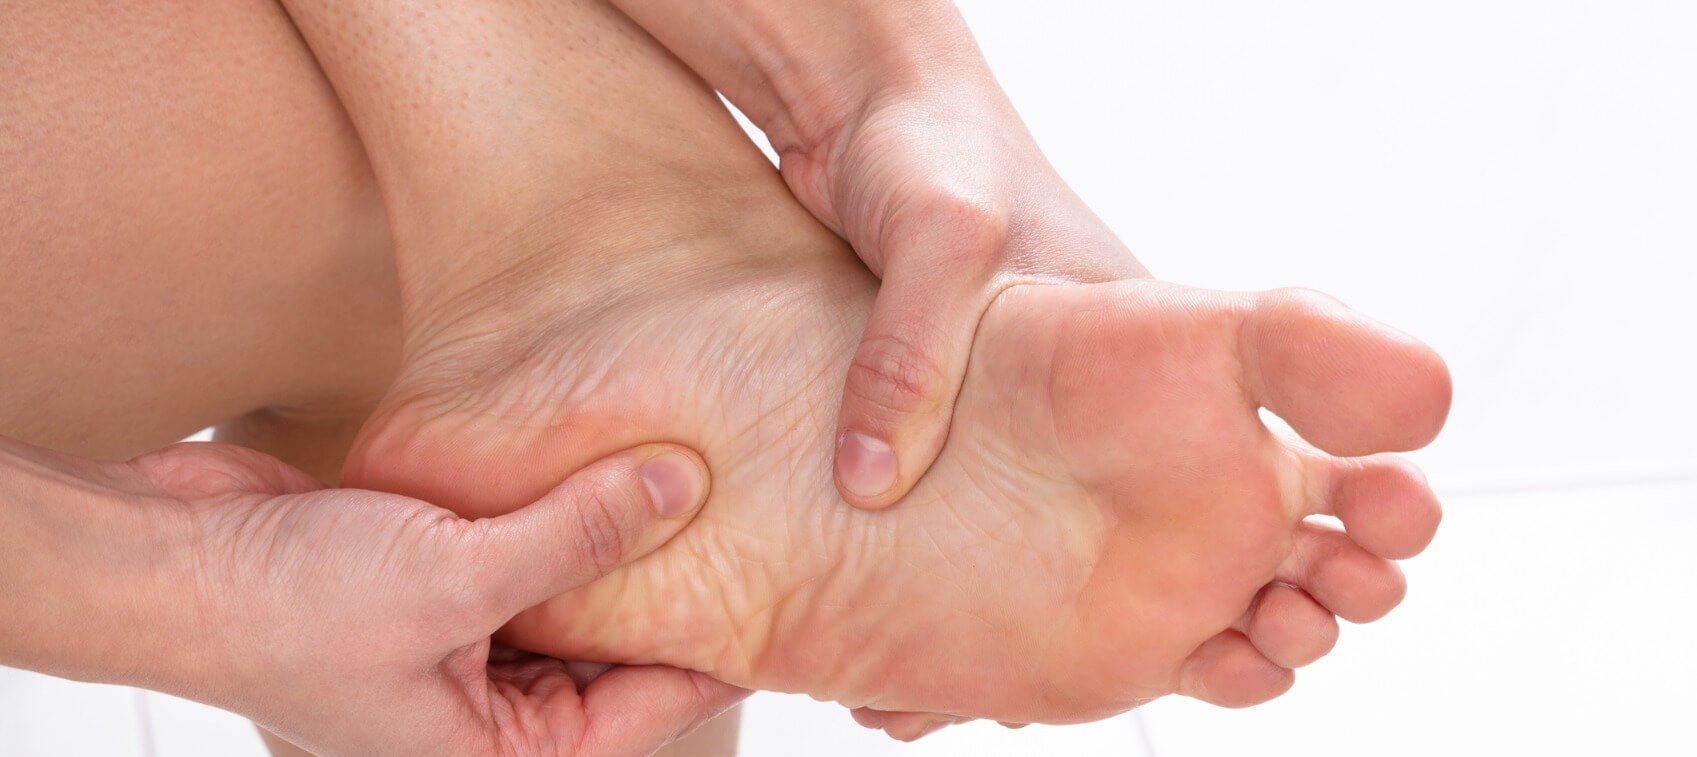 Relief from Peripheral Neuropathy Pain